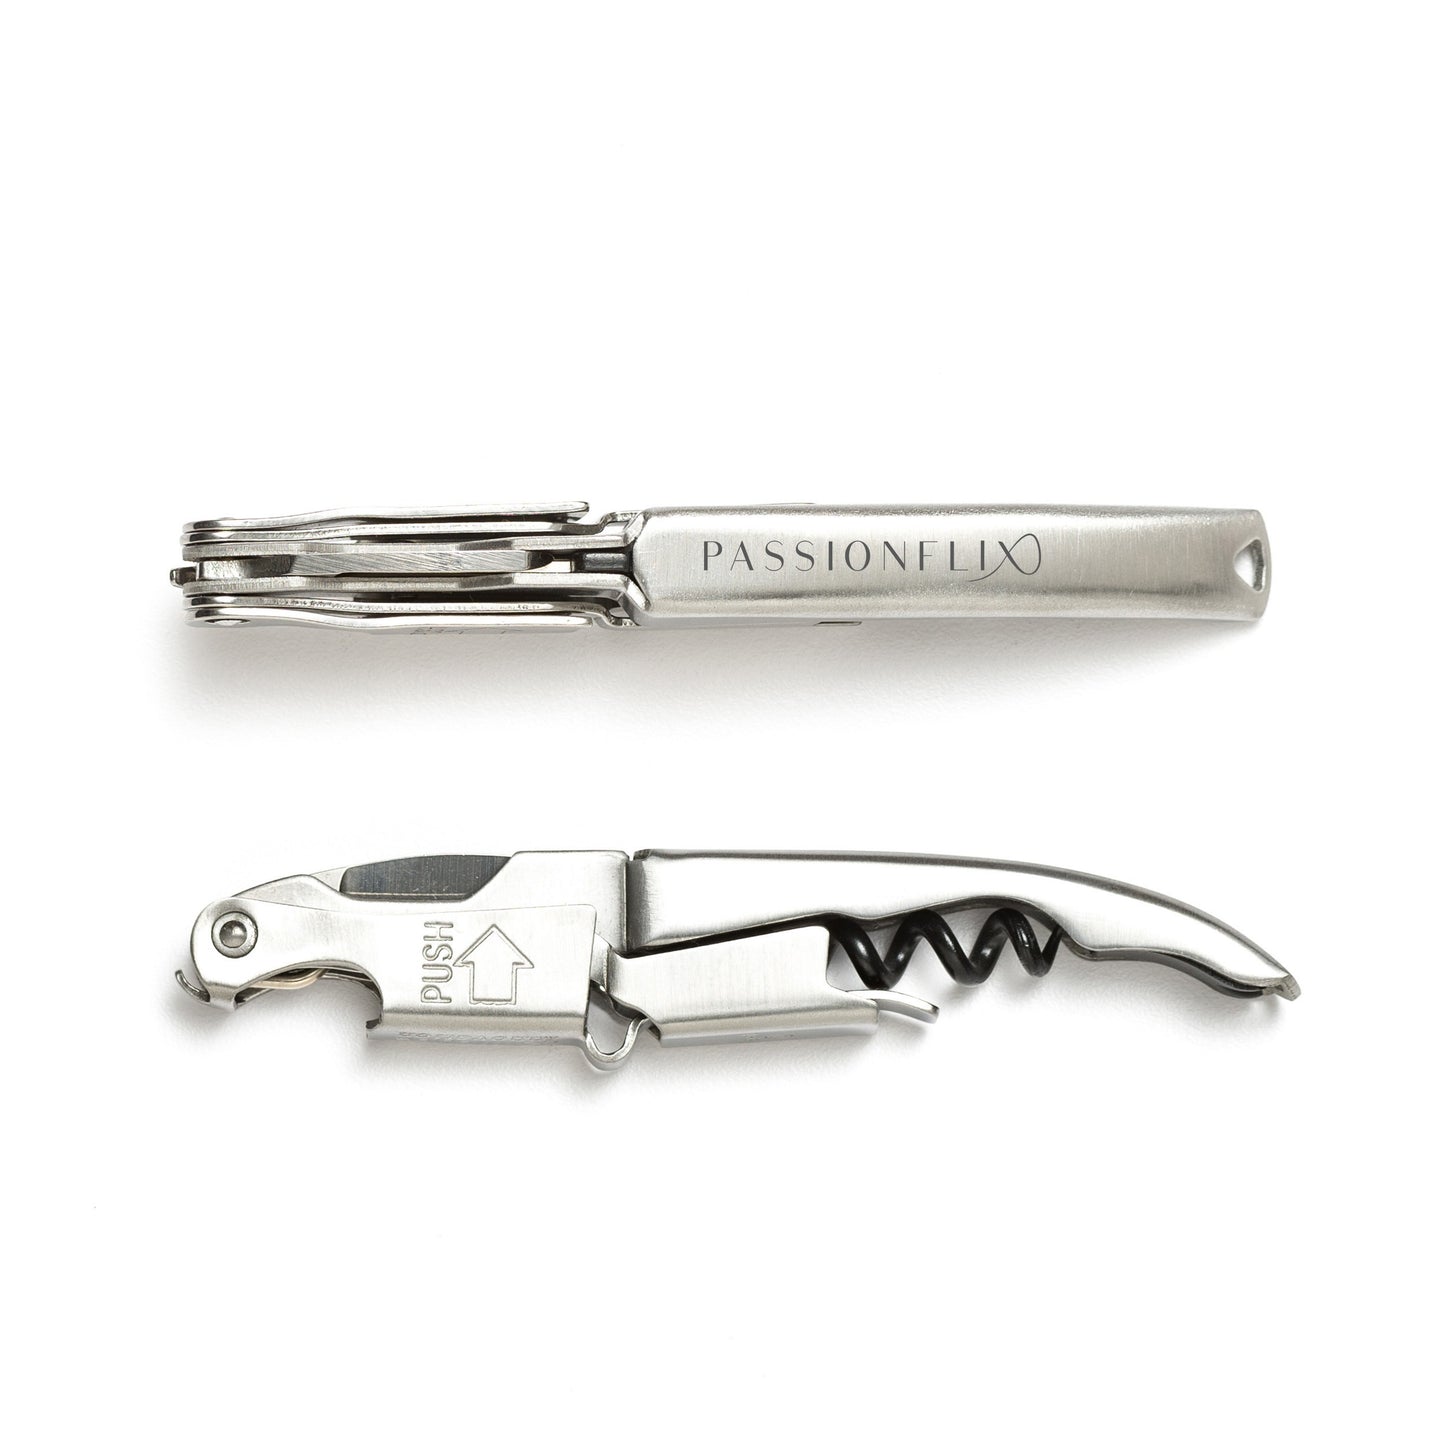 Passionflix Stainless Steel Innovation Corkscrew by Coutale Sommelier